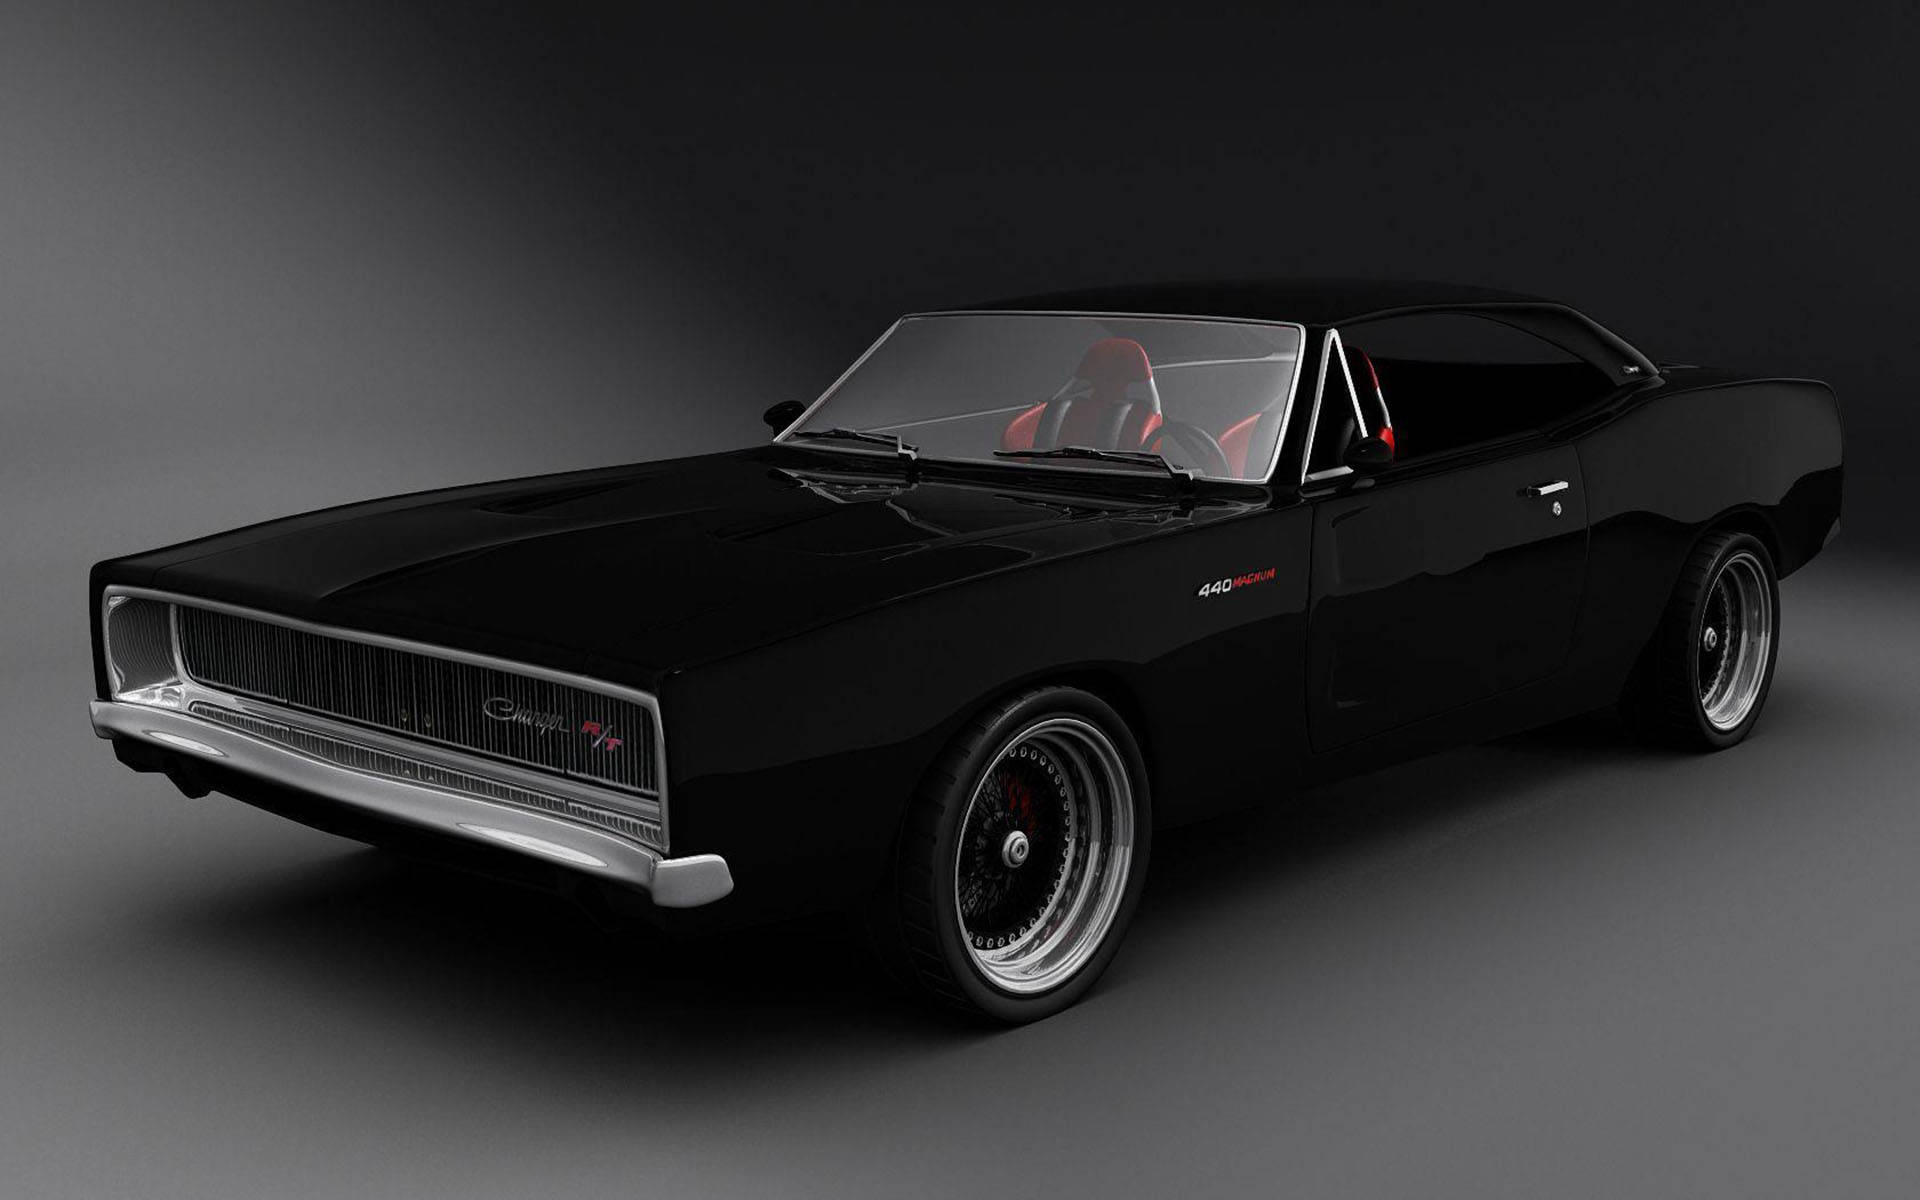 Immaculate Classic - 1969 Dodge Charger Wallpaper